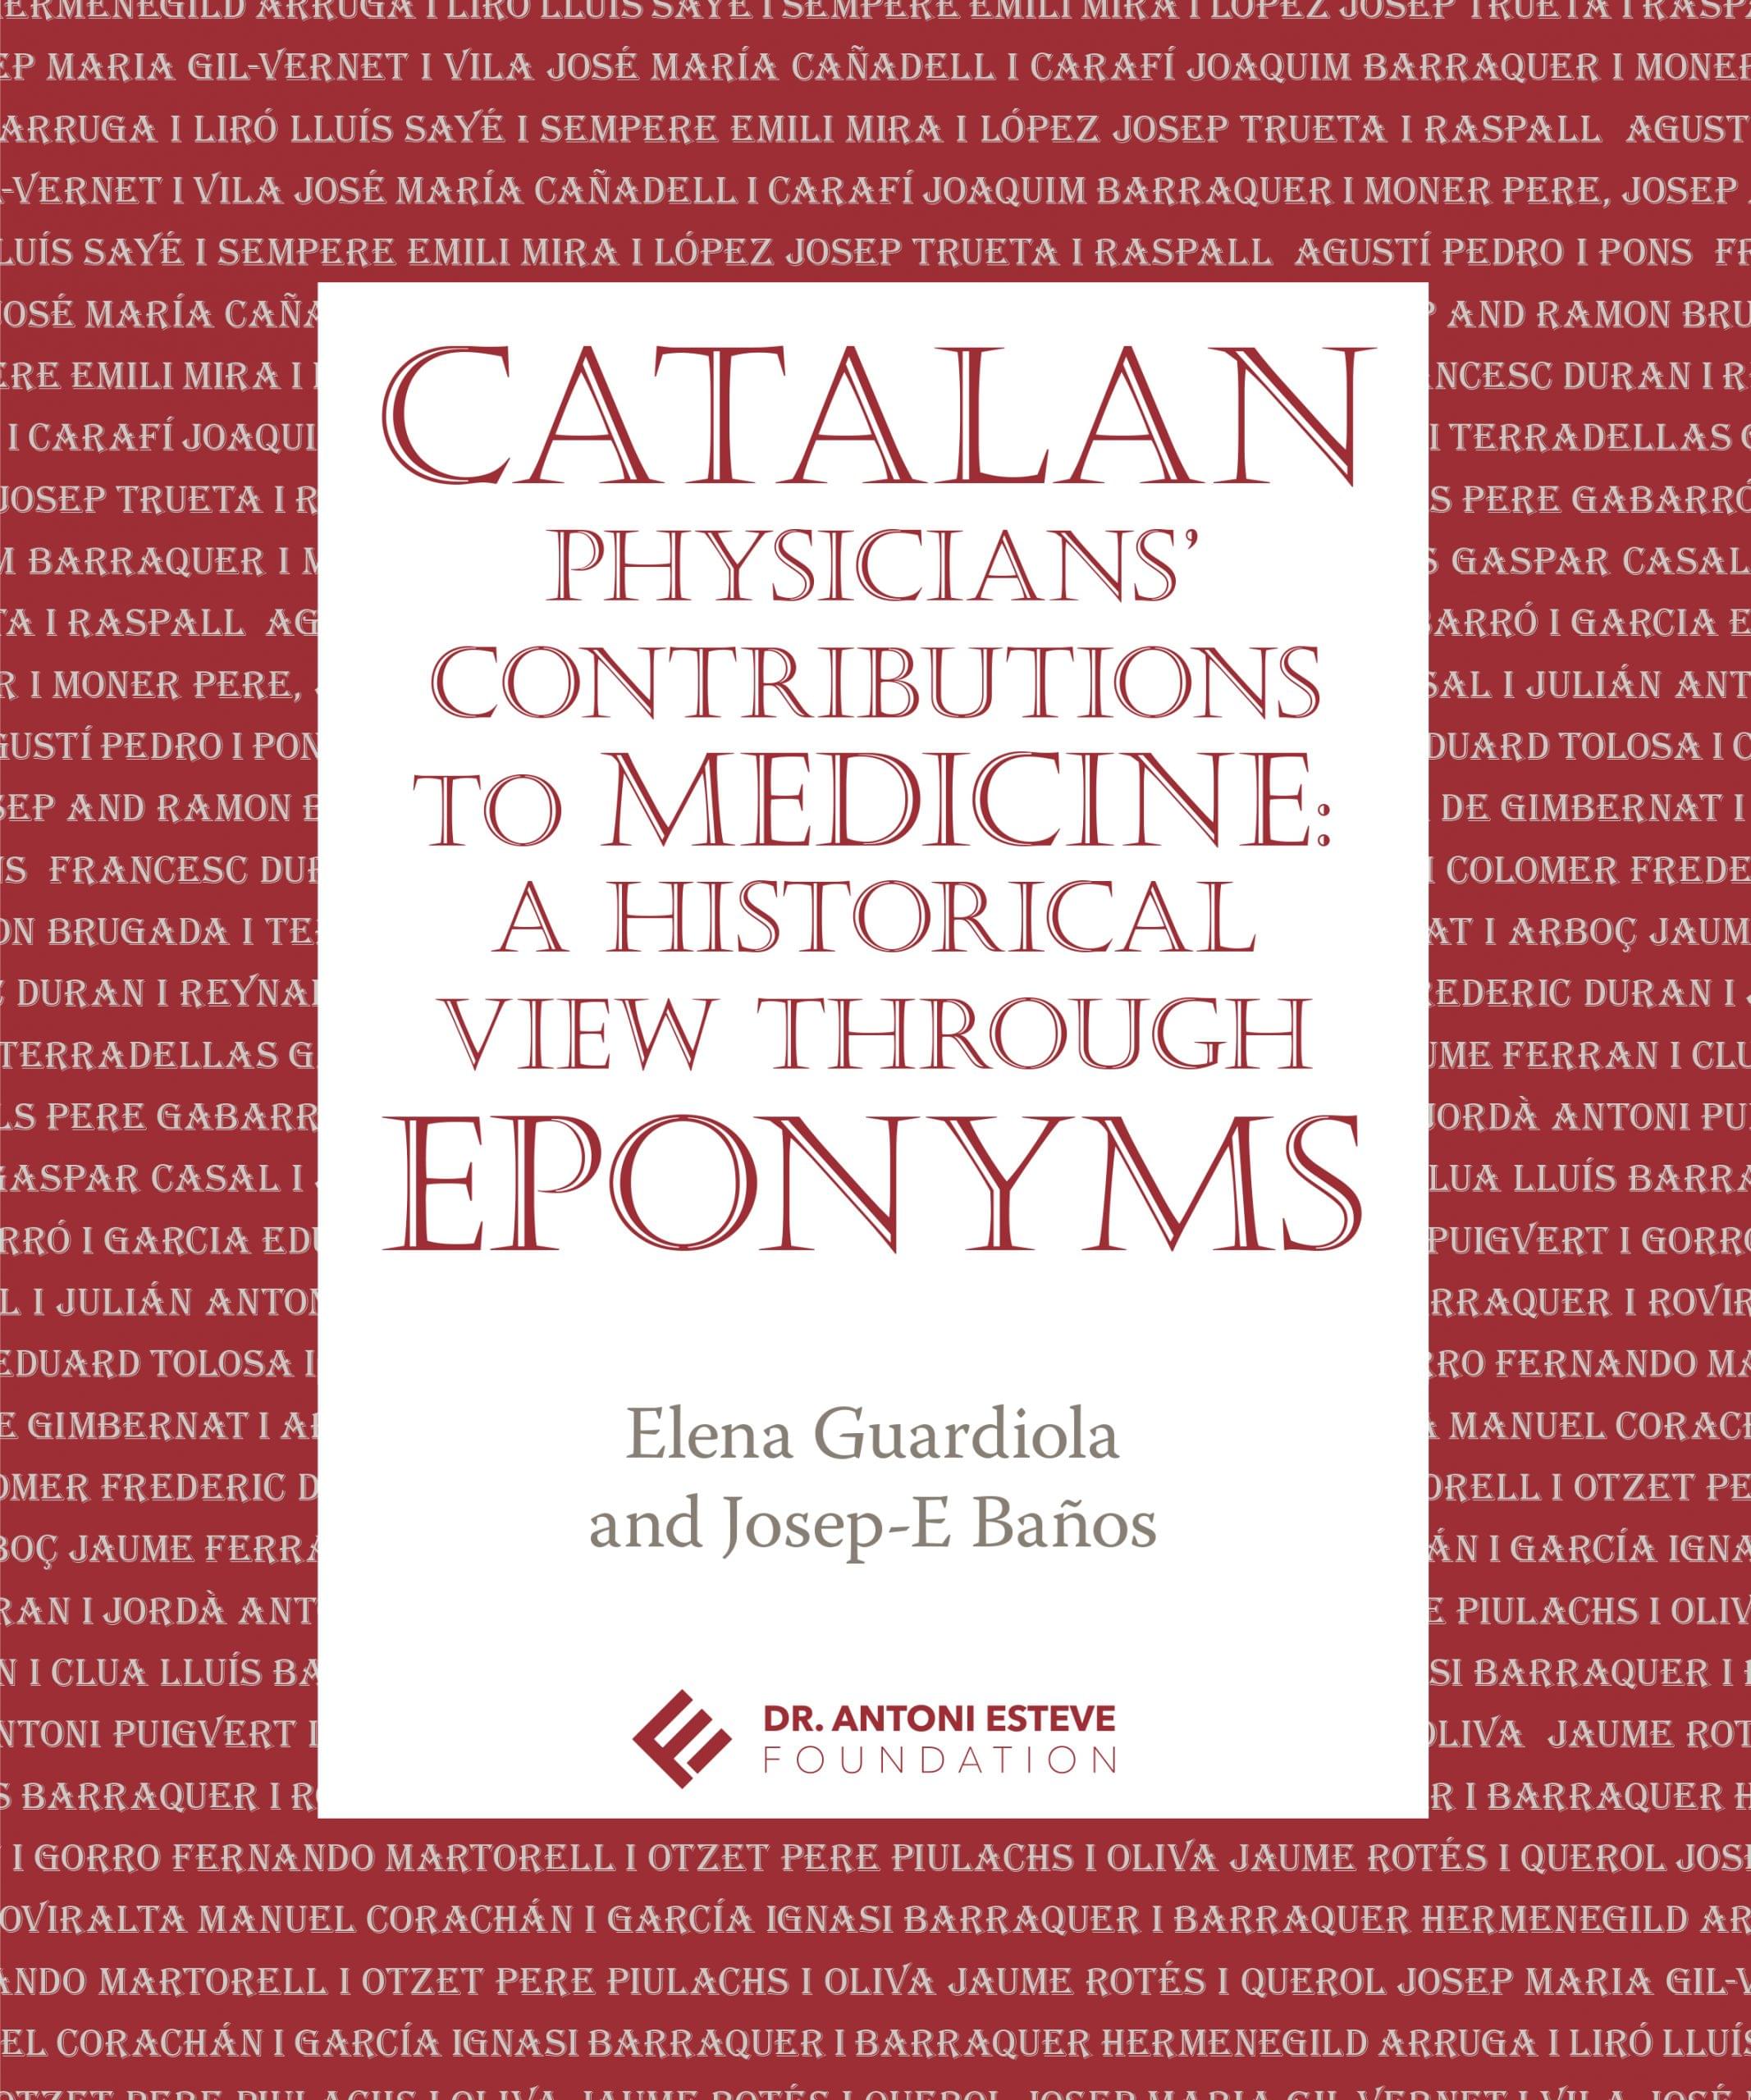 Catalan Physicians Contributions to Medicine: a historical view through eponyms